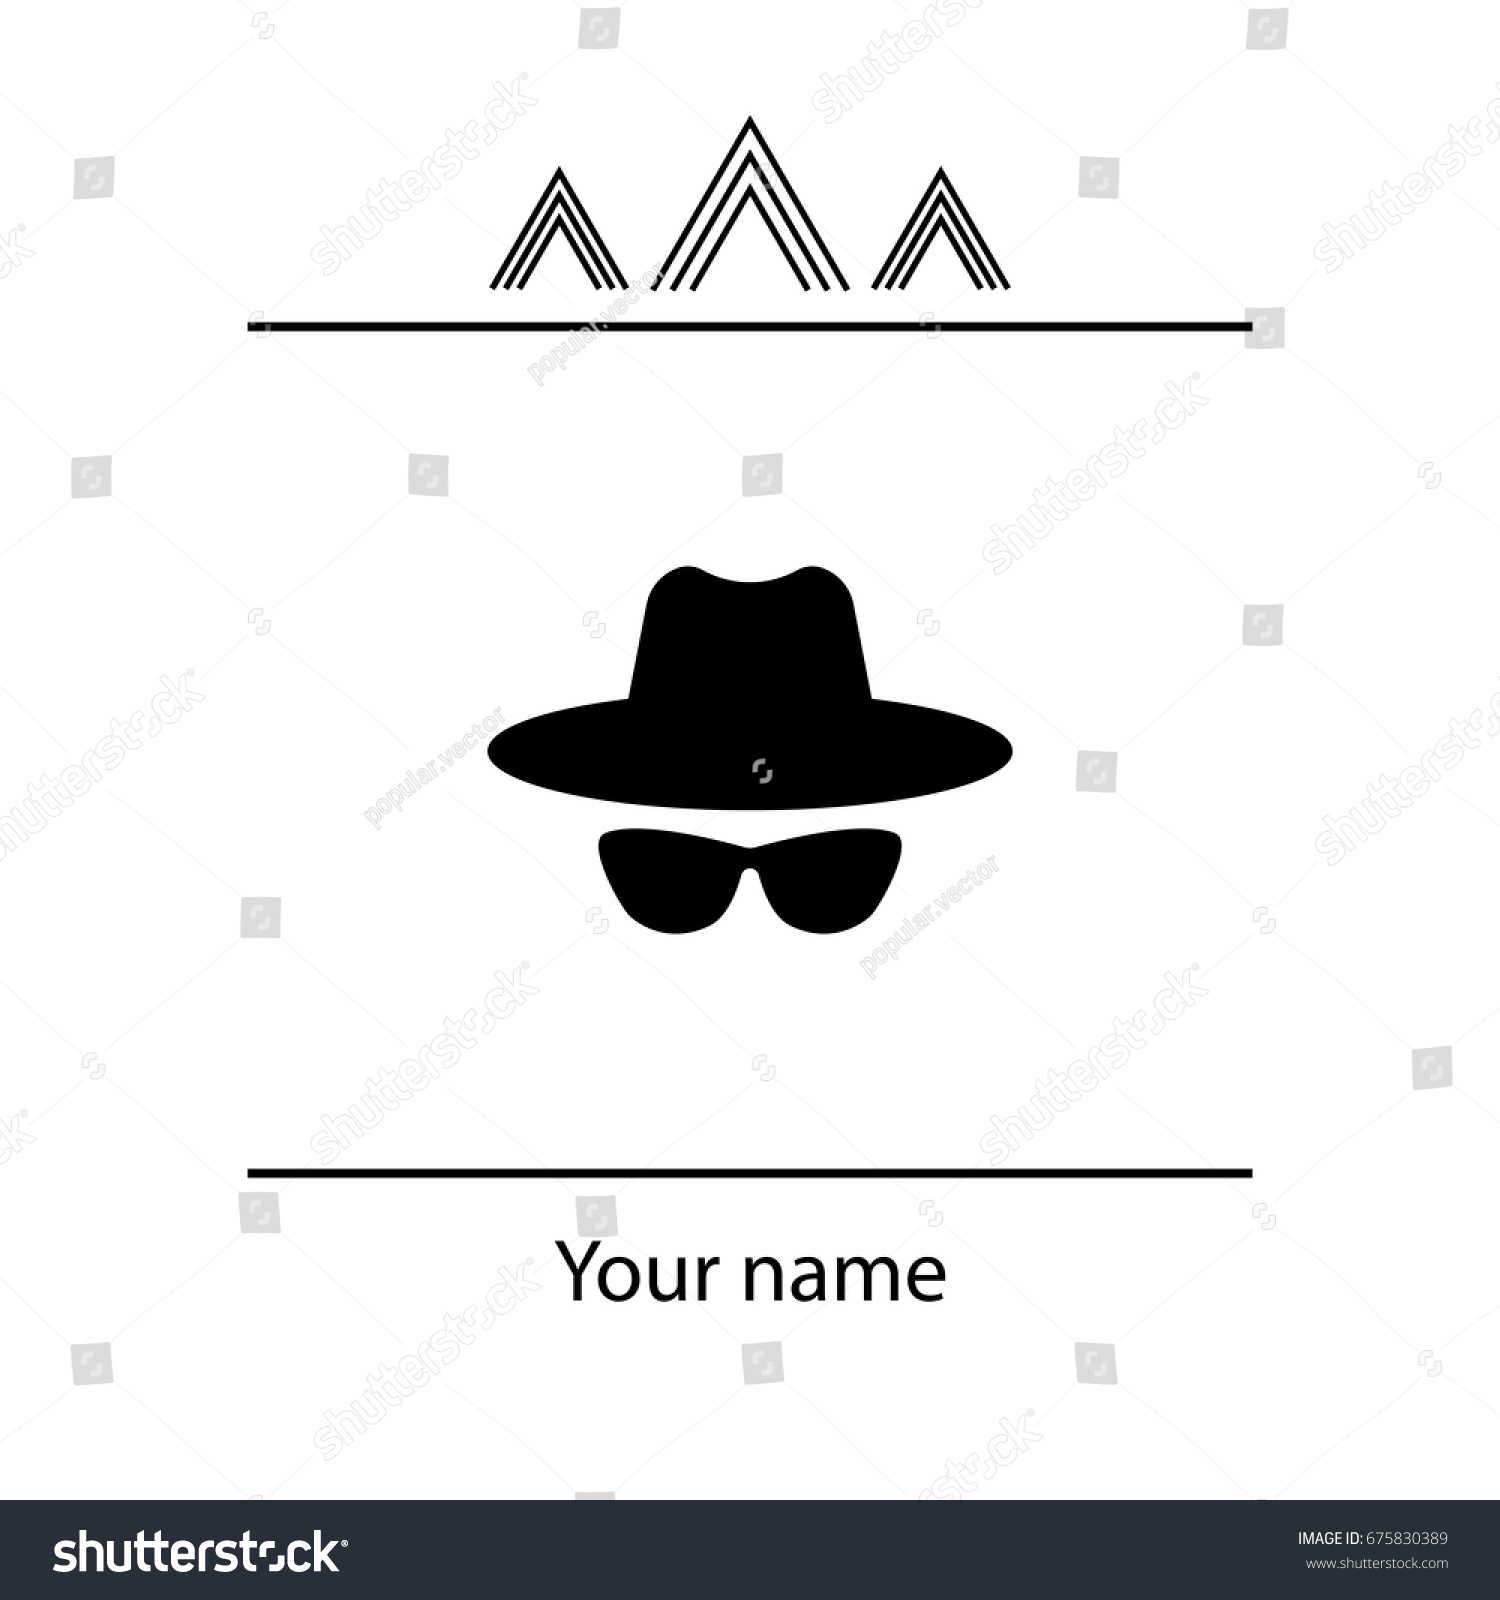 SVG of Agent icon. Spy sunglasses. Hat and glasses svg